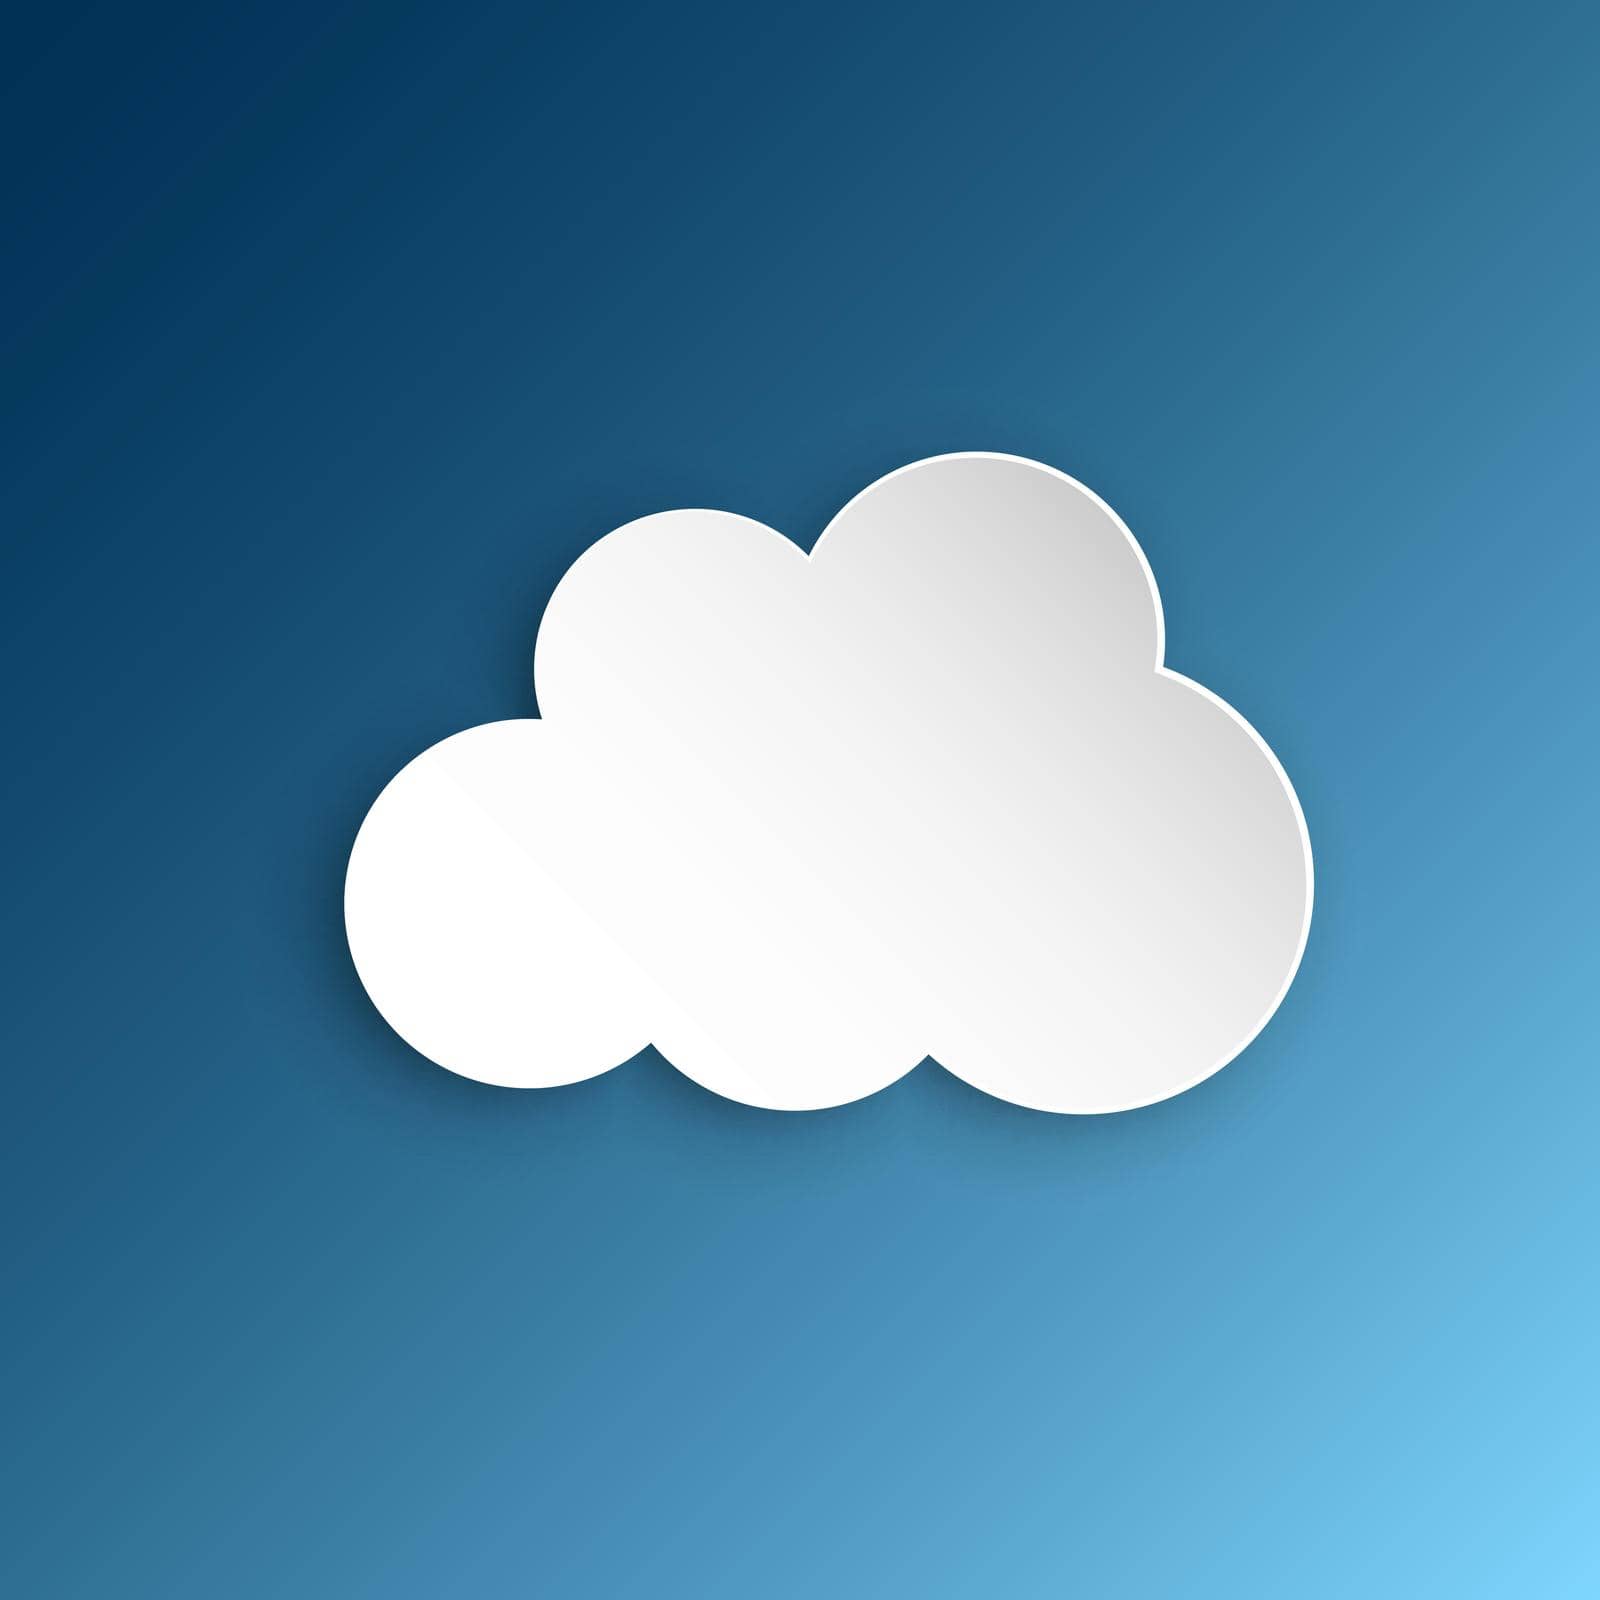 Paper clouds on a blue sky. Сartoon paper cloud illustration background. Air business concept.